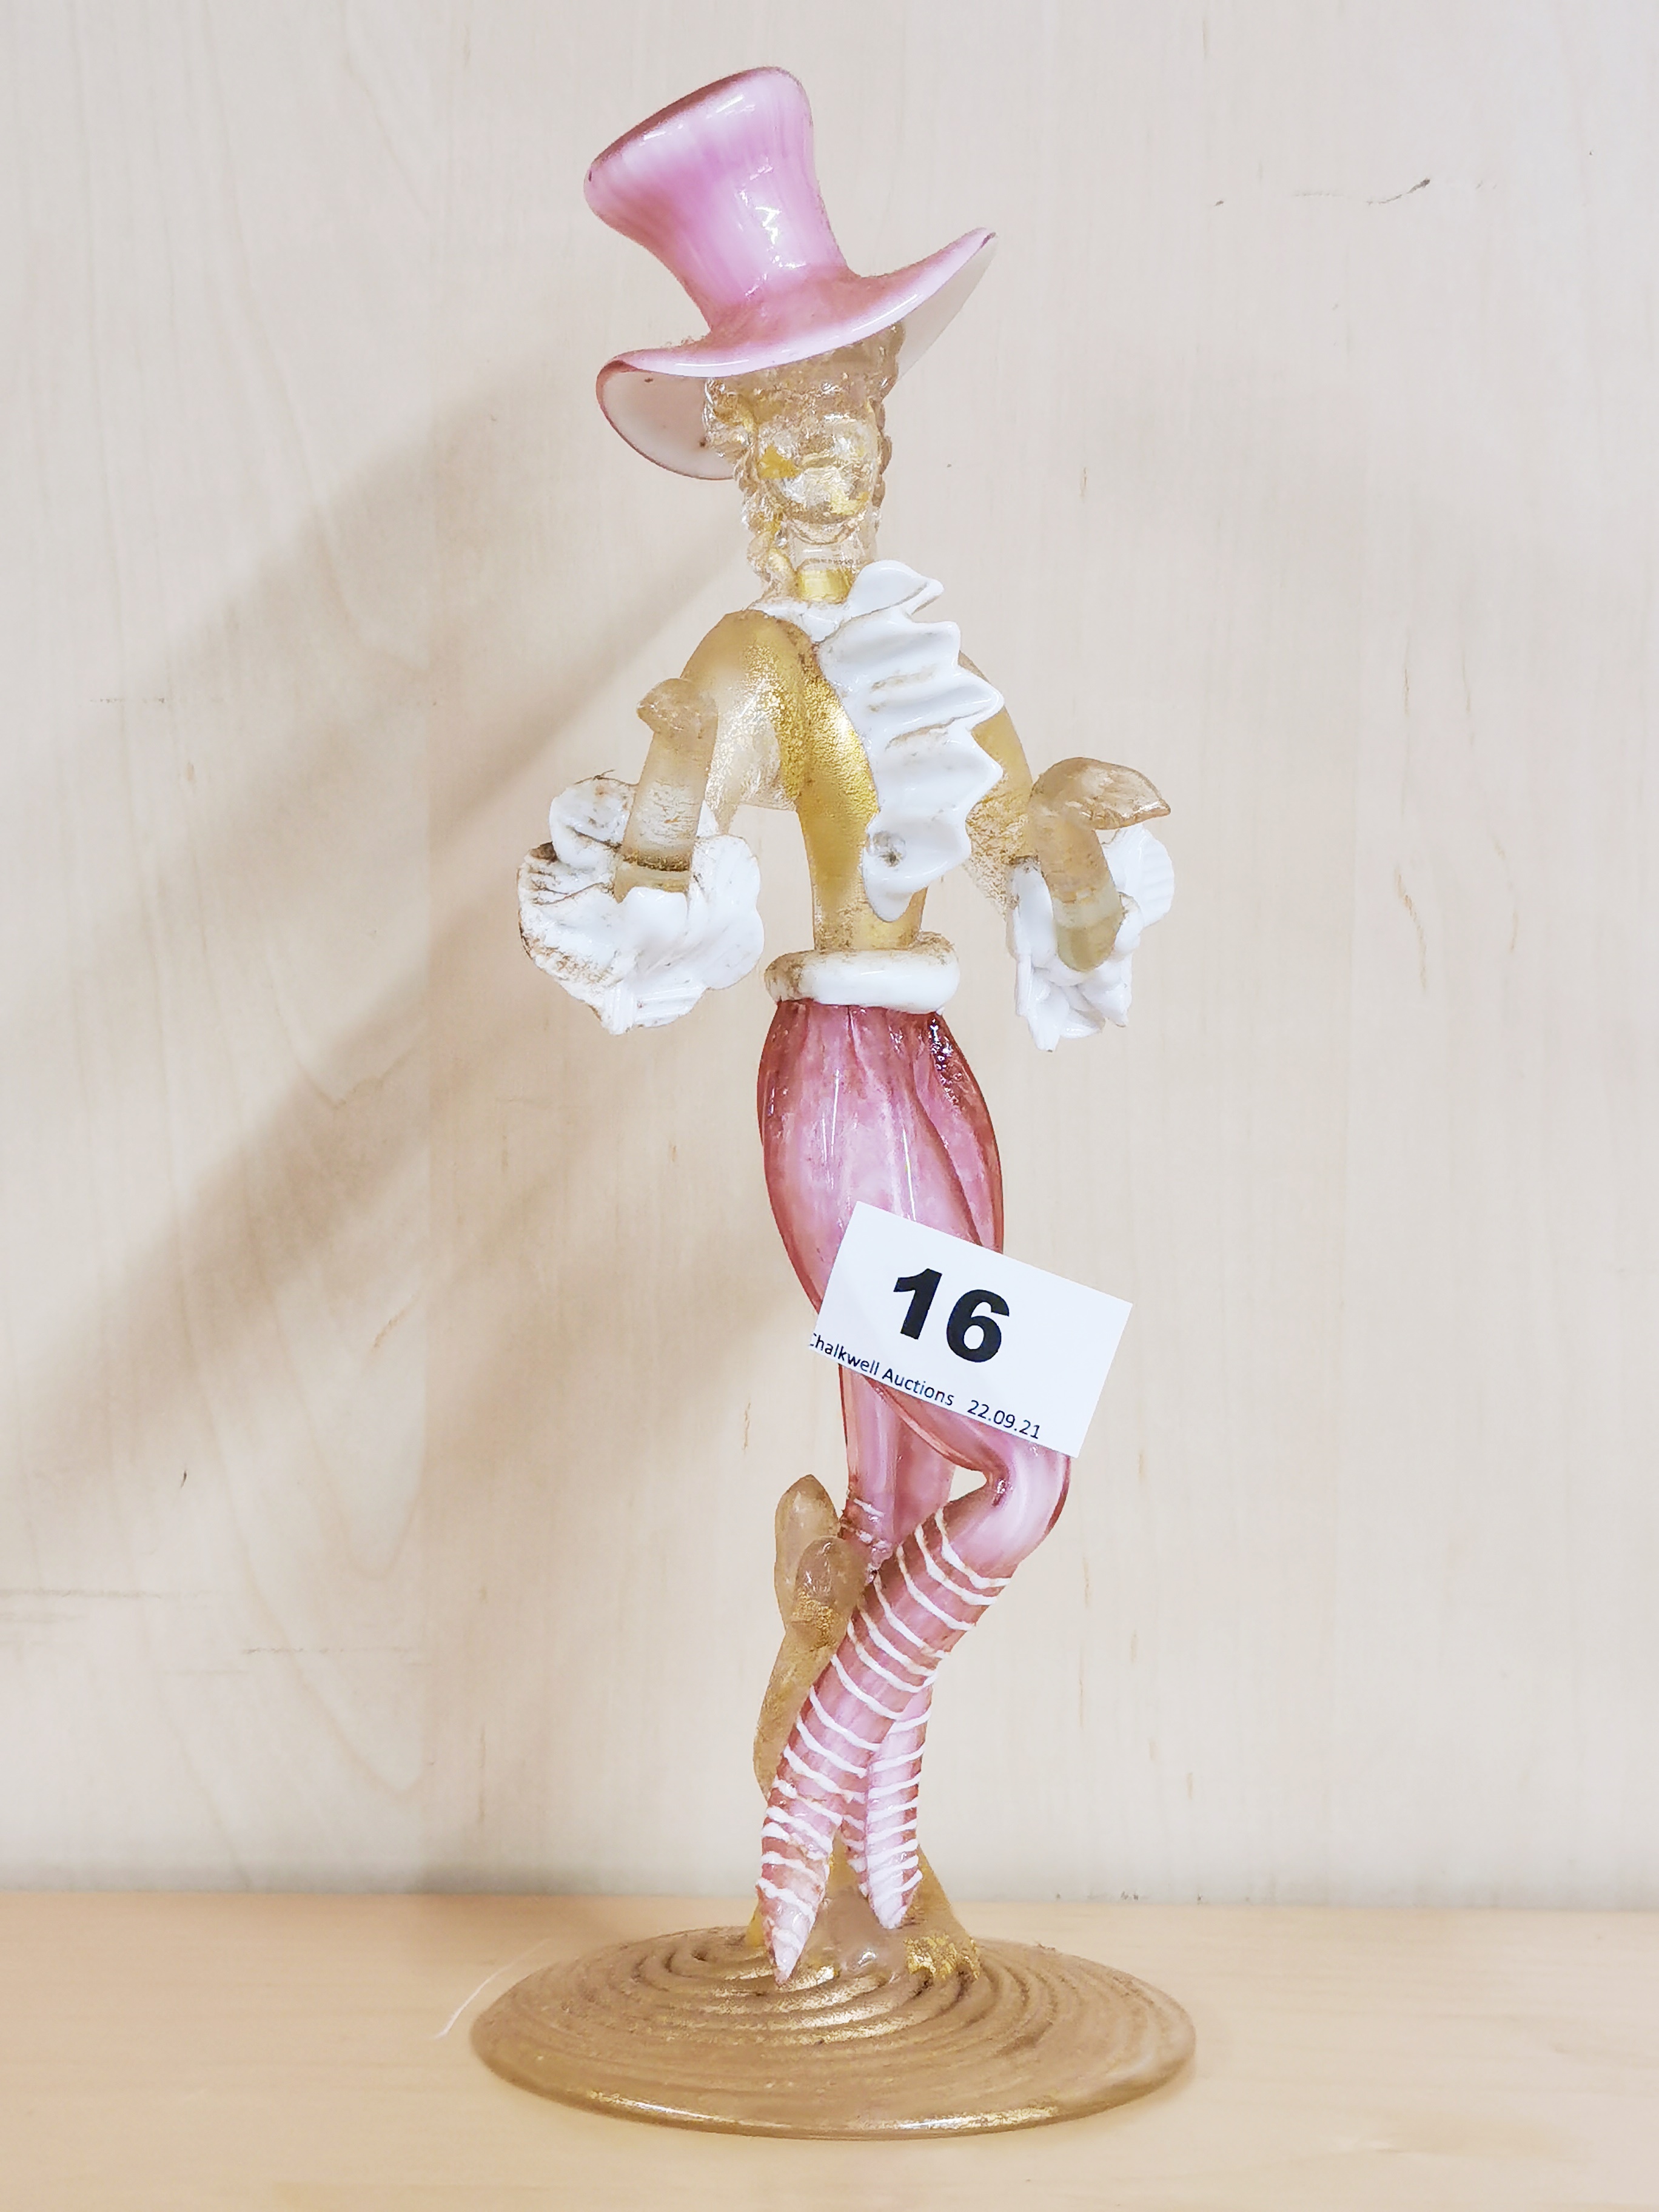 A lovely early Murano glass figure of a dancer, H. 26cm. Condition: no visible damage or repair.